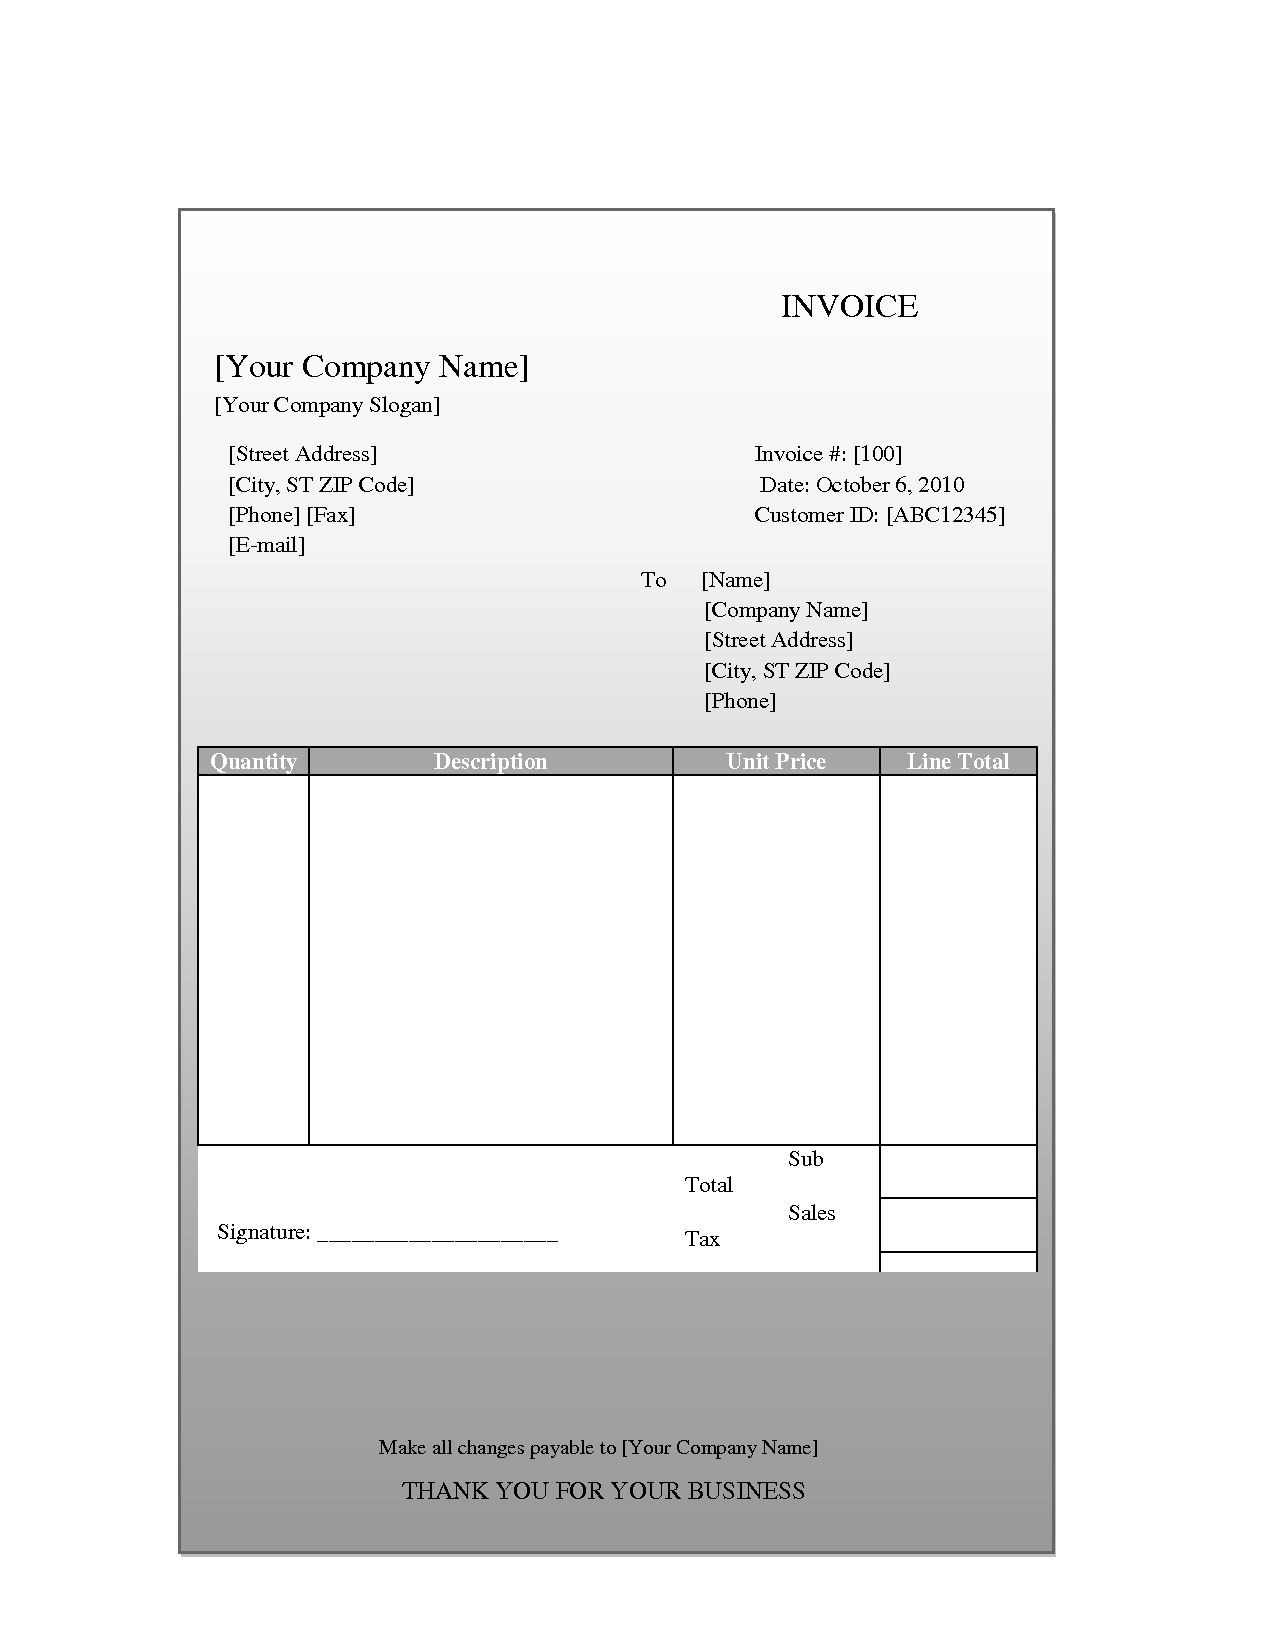 blank invoice template blankinvoice blank invoice forms